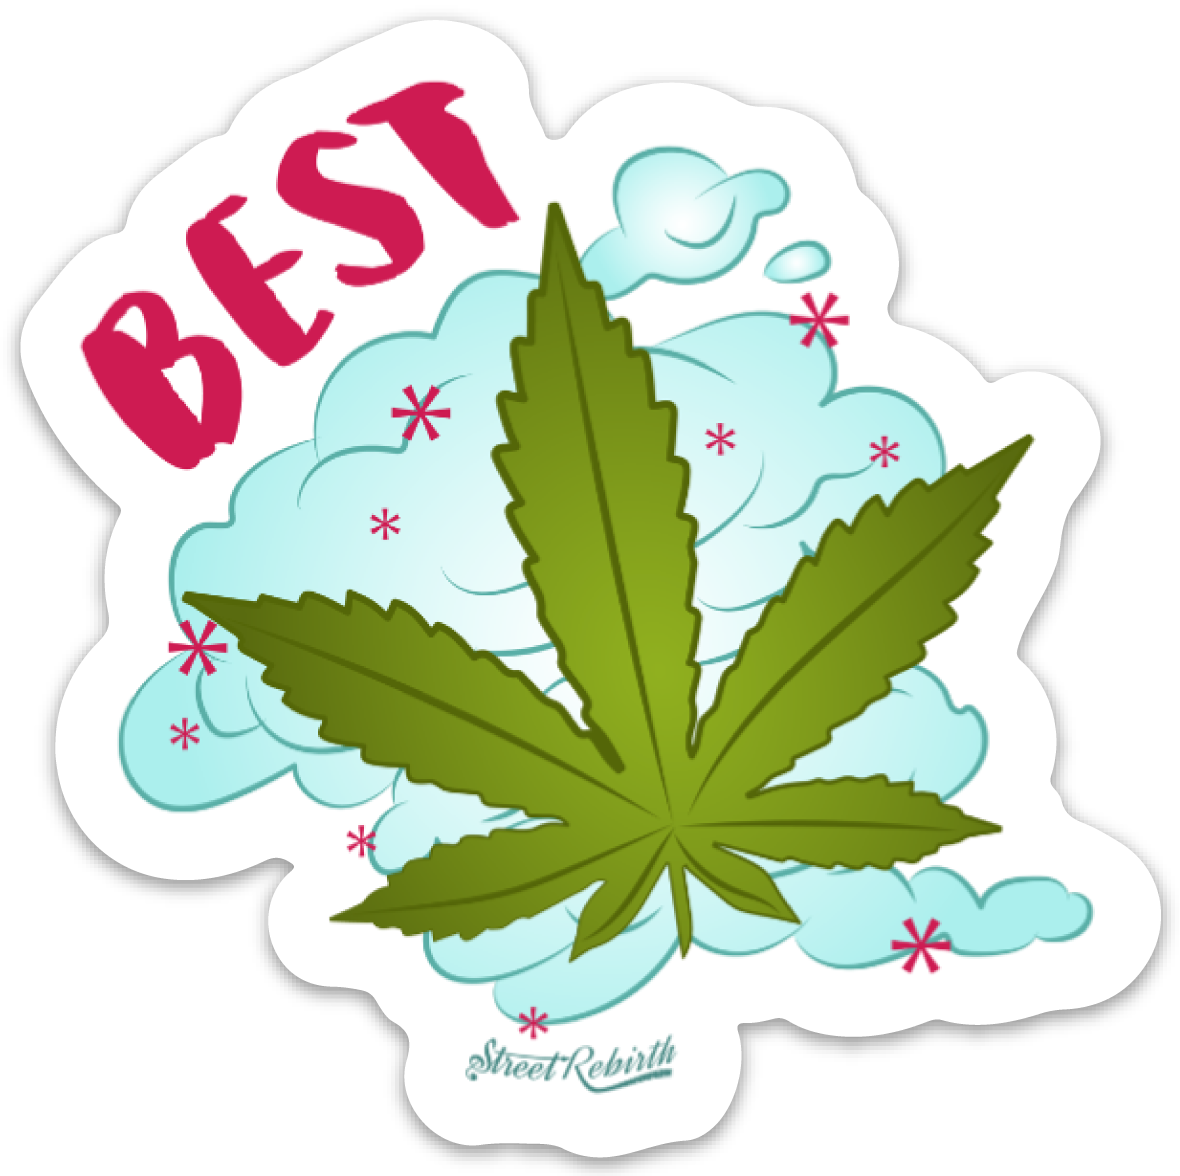 BEST PUN STICKER – ONE 4 INCH WATER PROOF VINYL STICKER – FOR HYDRO FLASK, SKATEBOARD, LAPTOP, PLANNER, CAR, COLLECTING, GIFTING